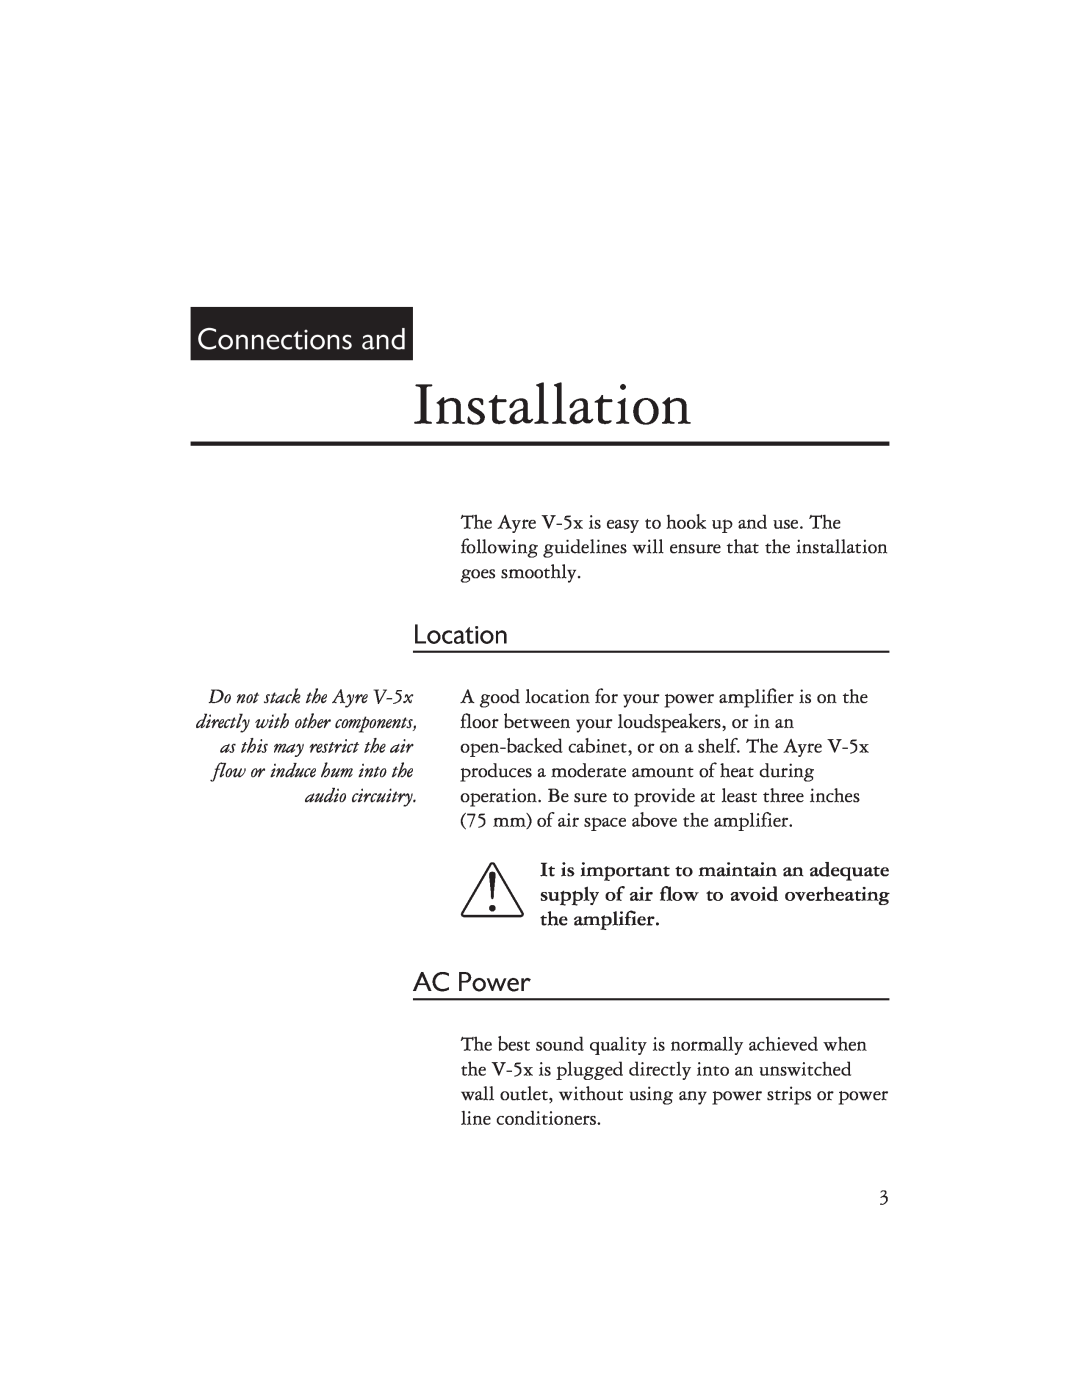 Ayre Acoustics V-5x owner manual Installation, Connections and, Location, AC Power 